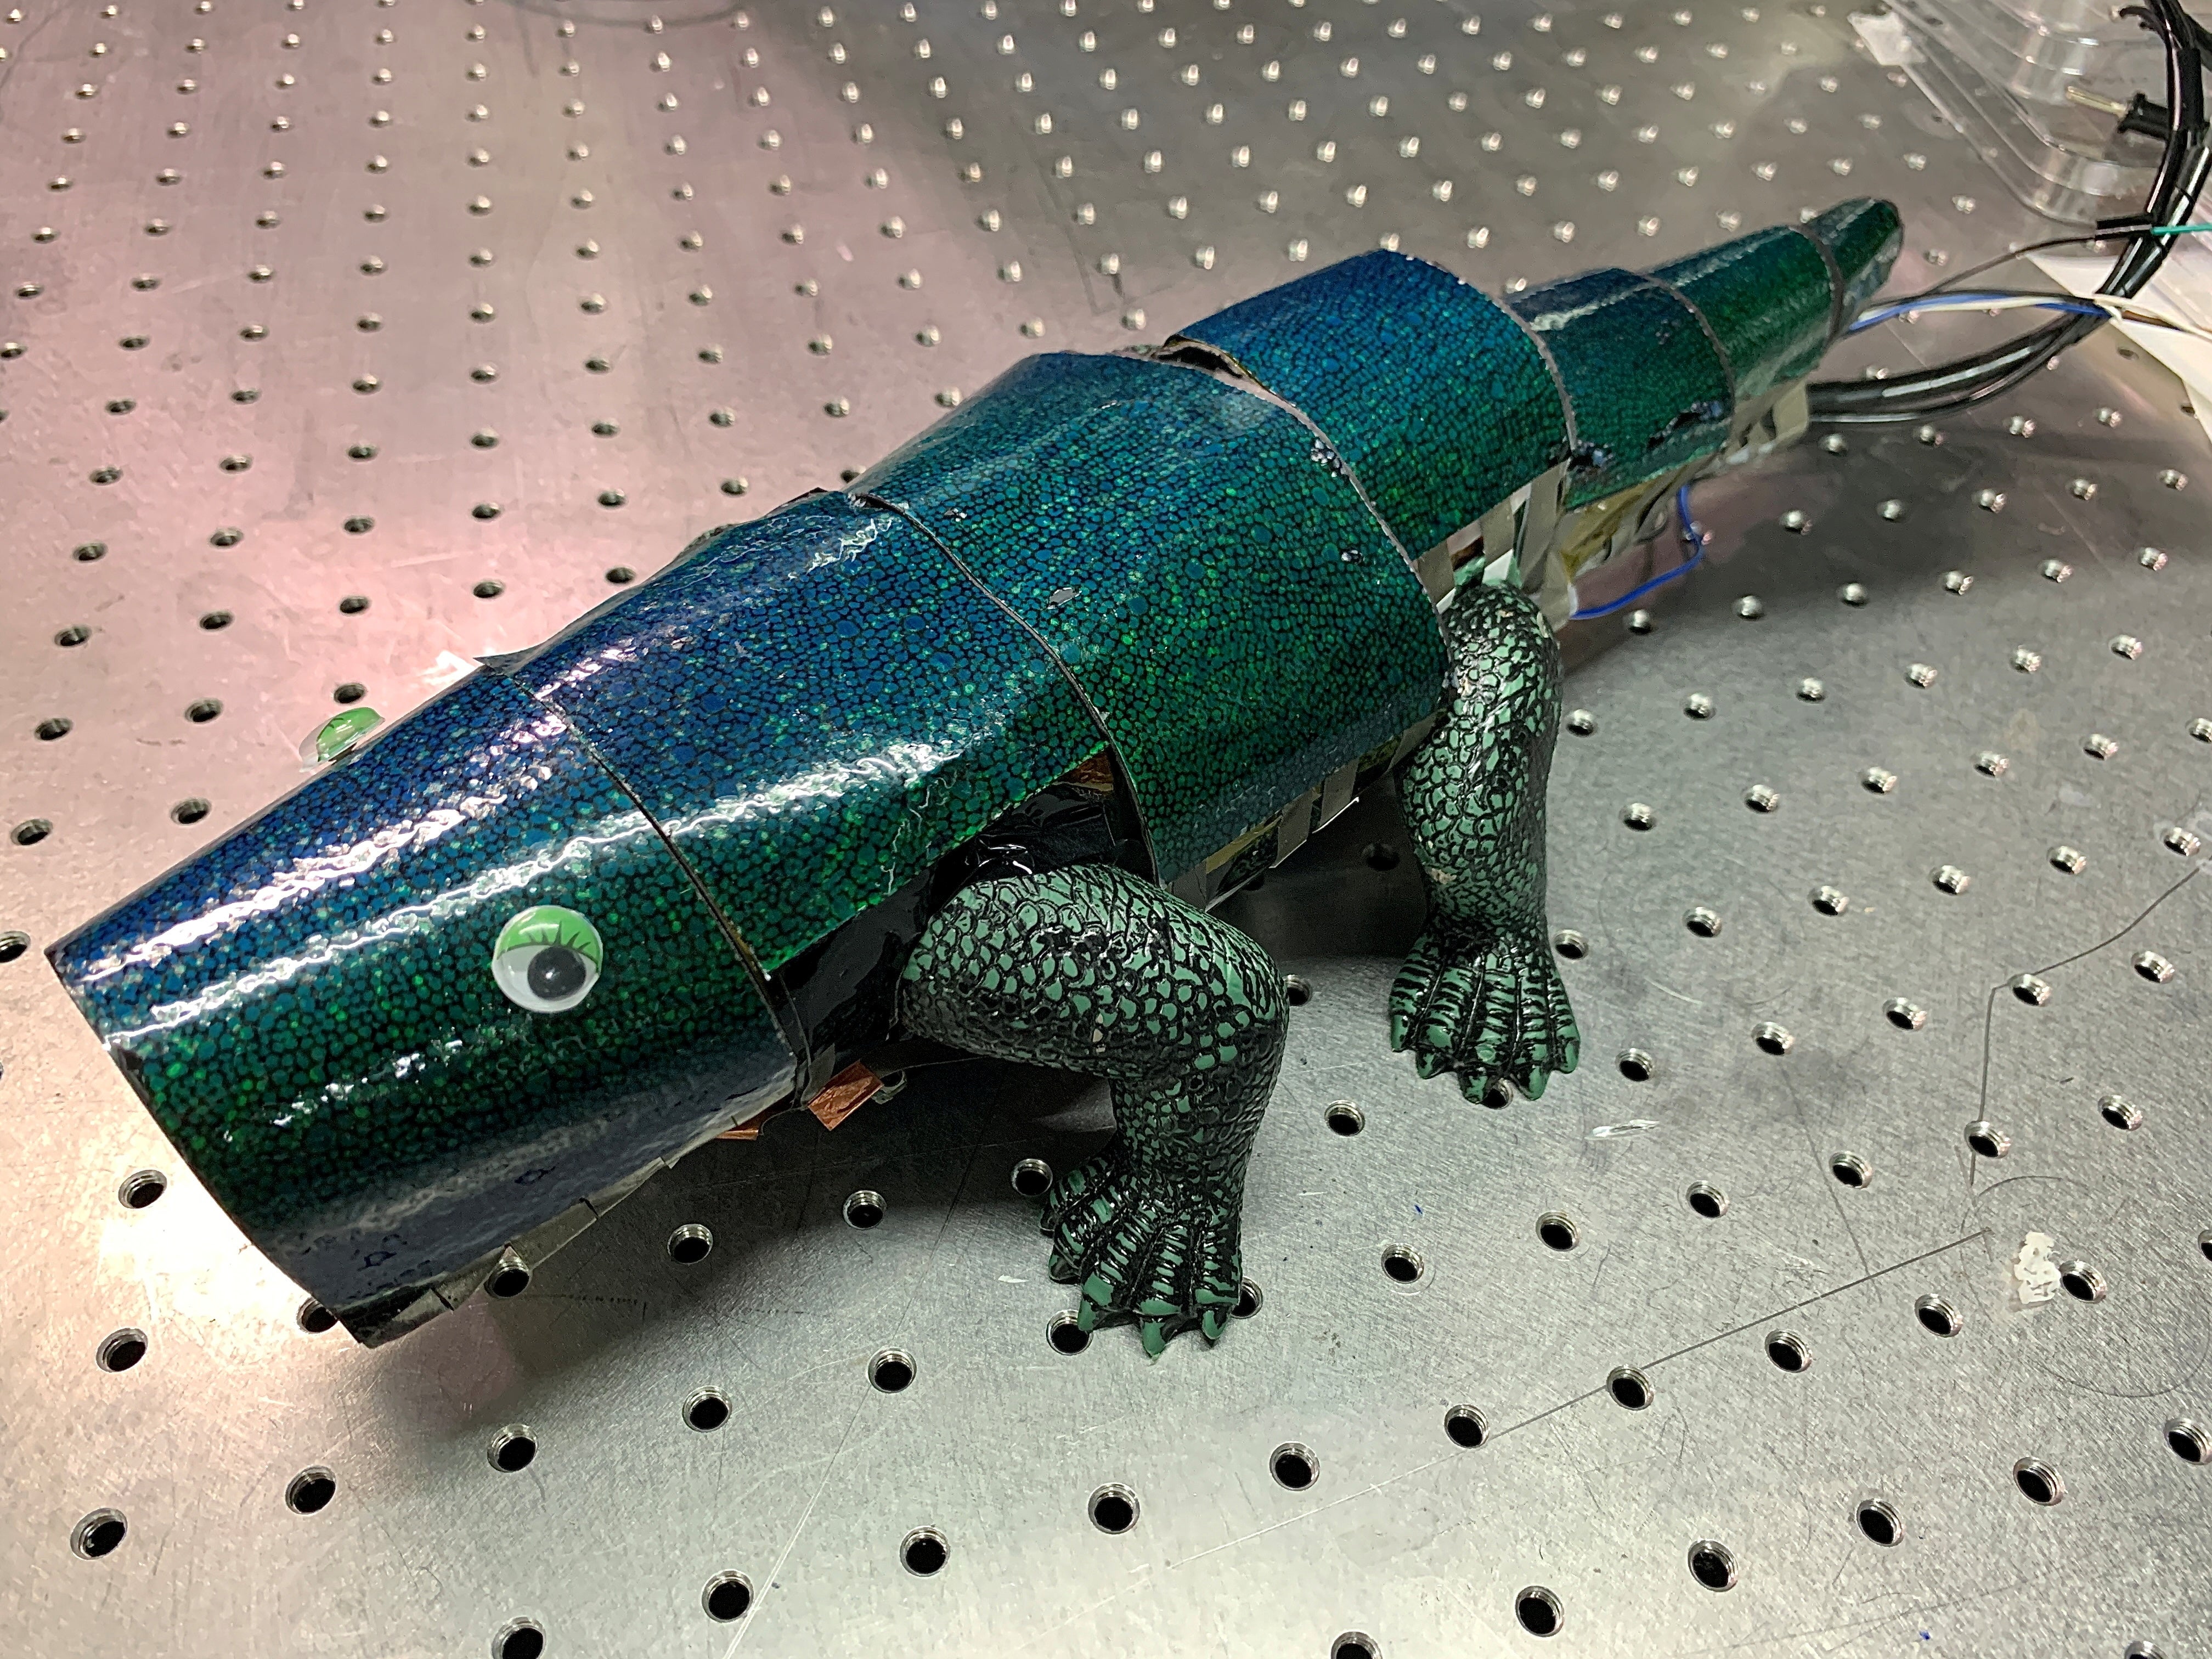 Chameleon robot covered with artificial skin that can change its colour based on surroundings